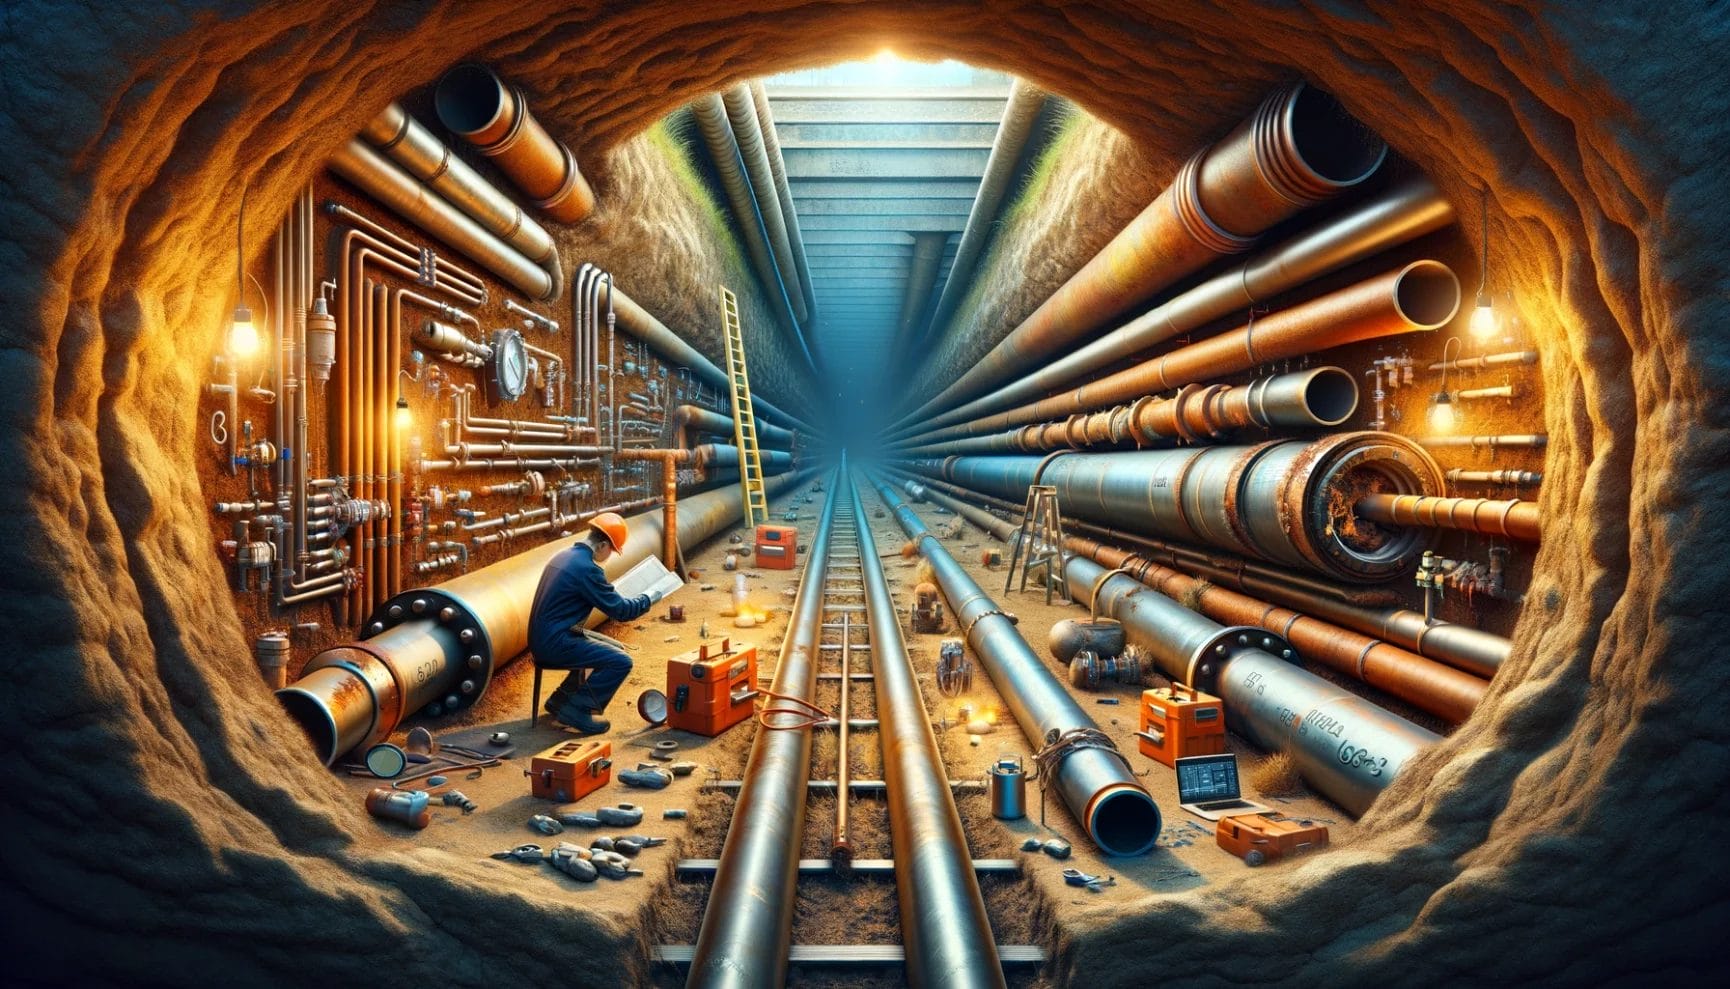 A man is working in a tunnel with pipes.